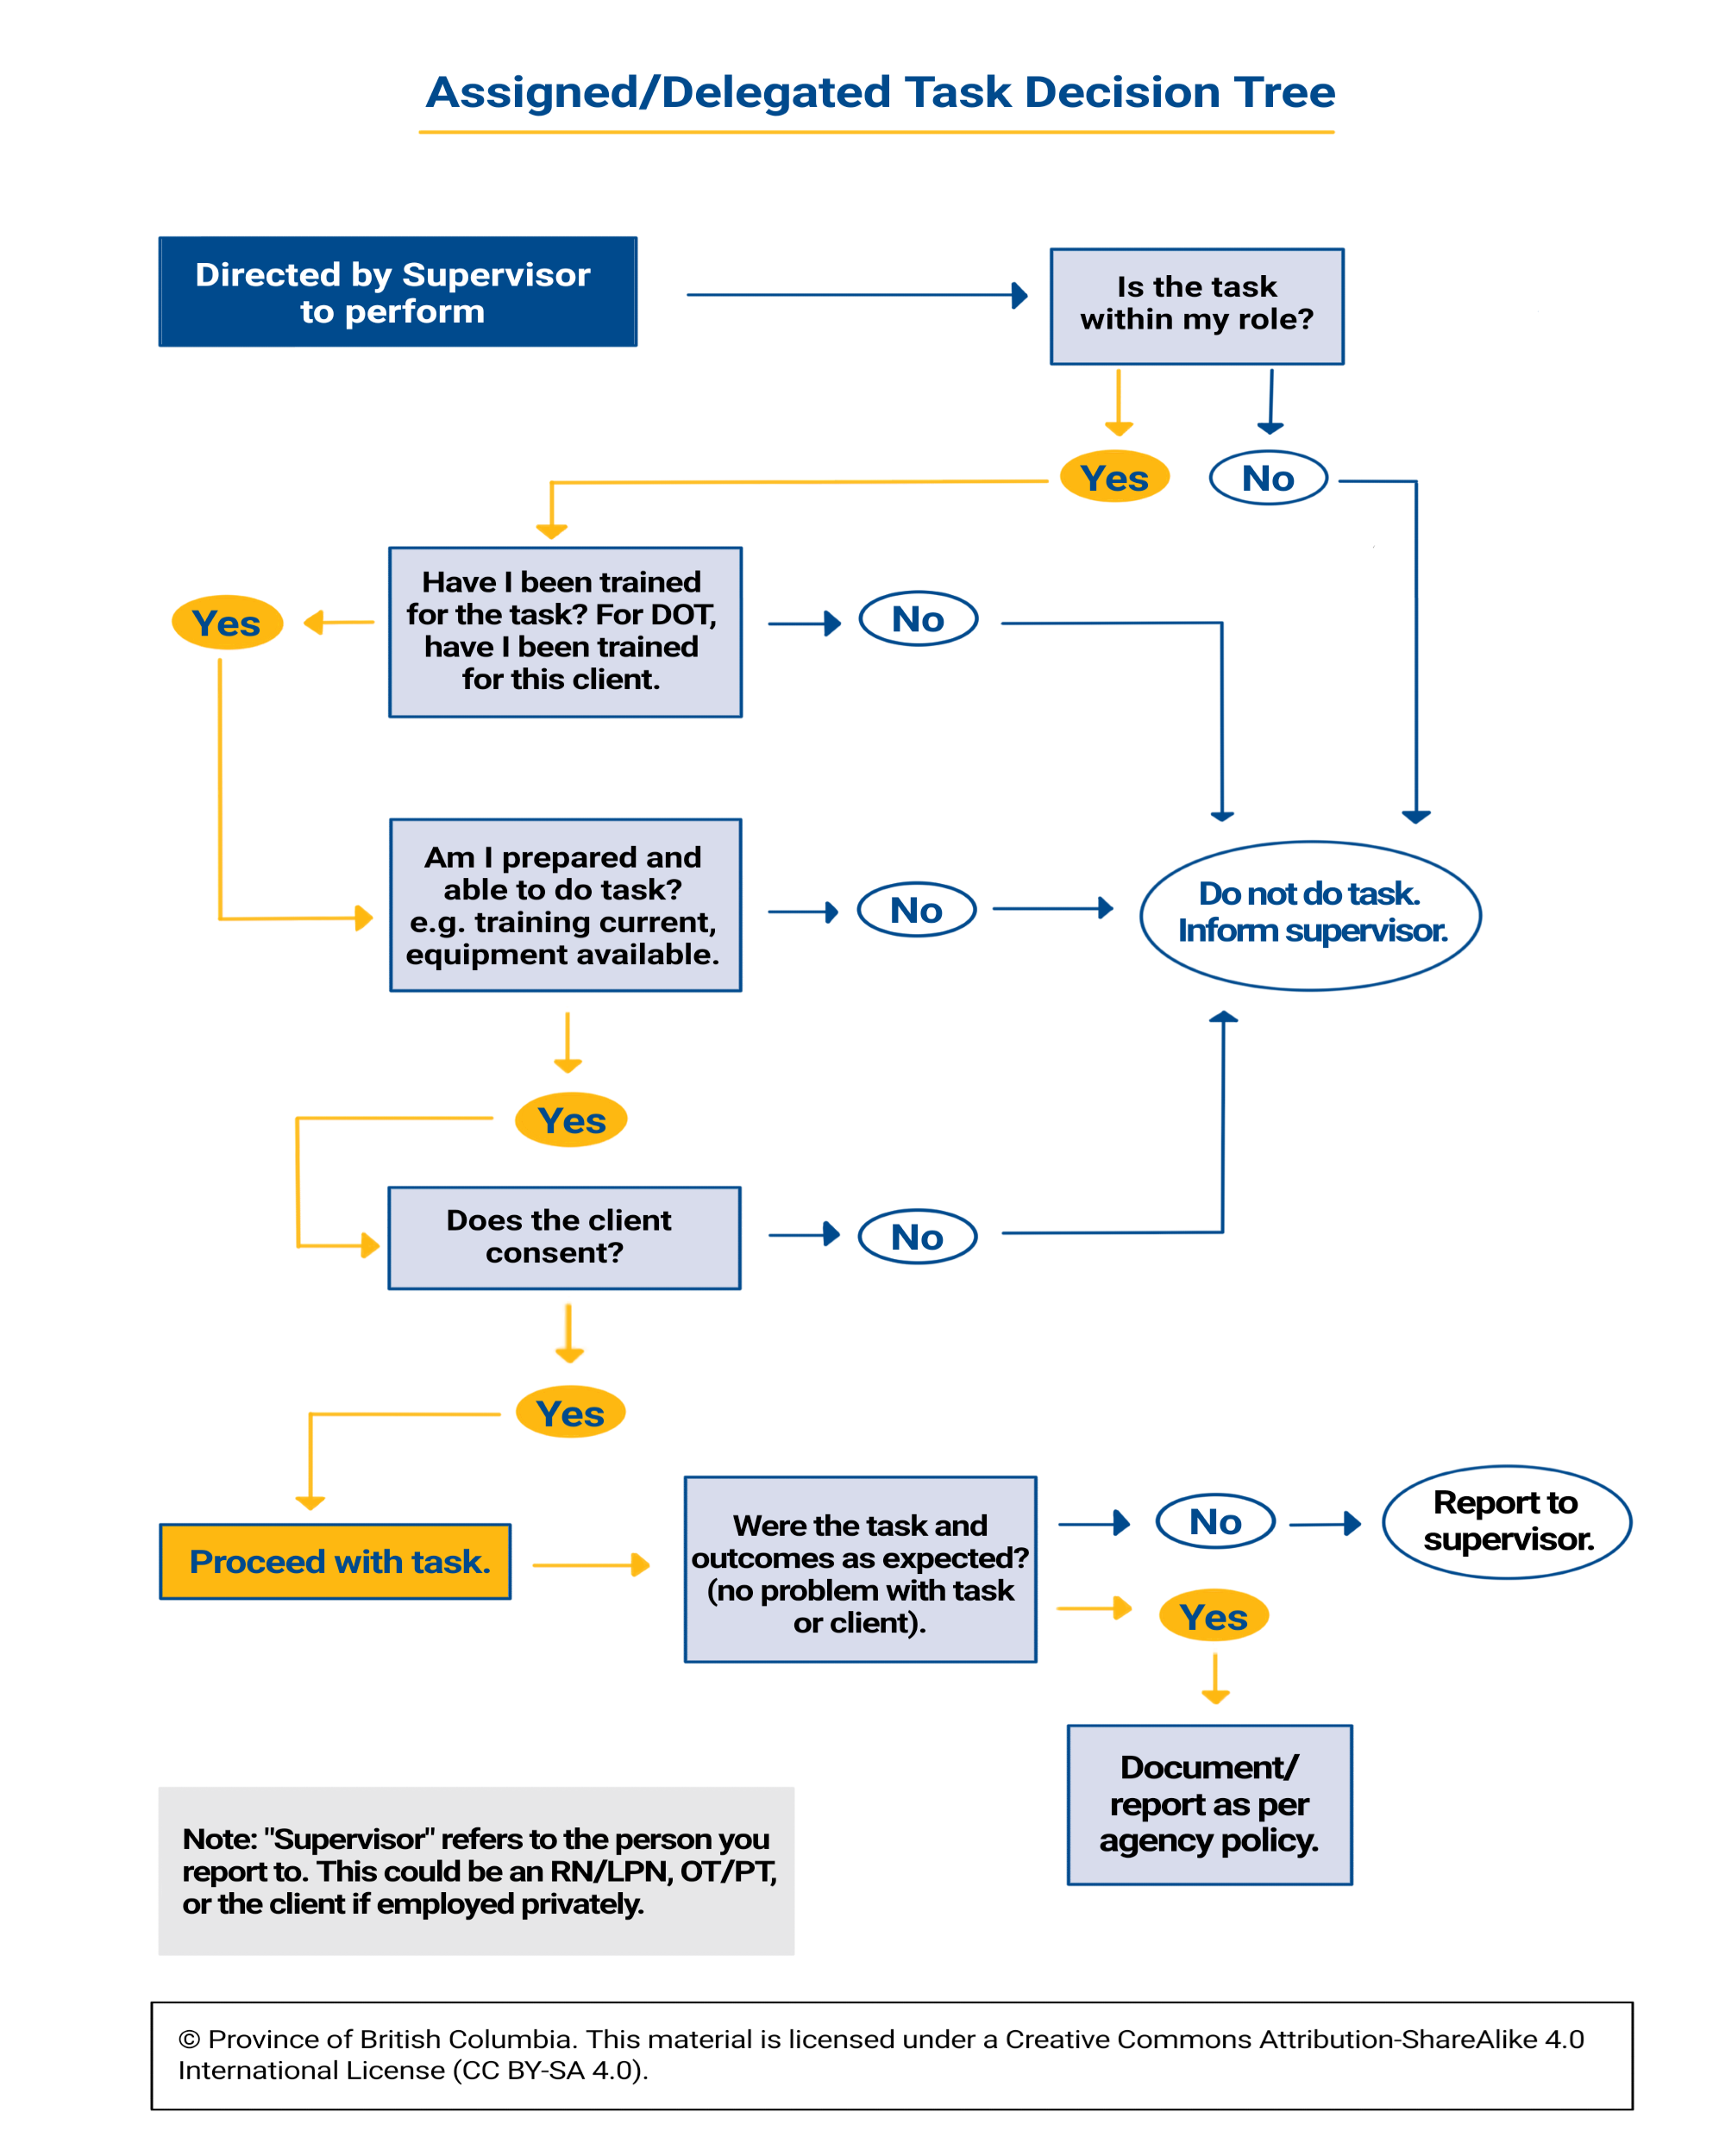 A flow chart of yes/no questions an HCA should consider when making decision about an assigned or delegated task.